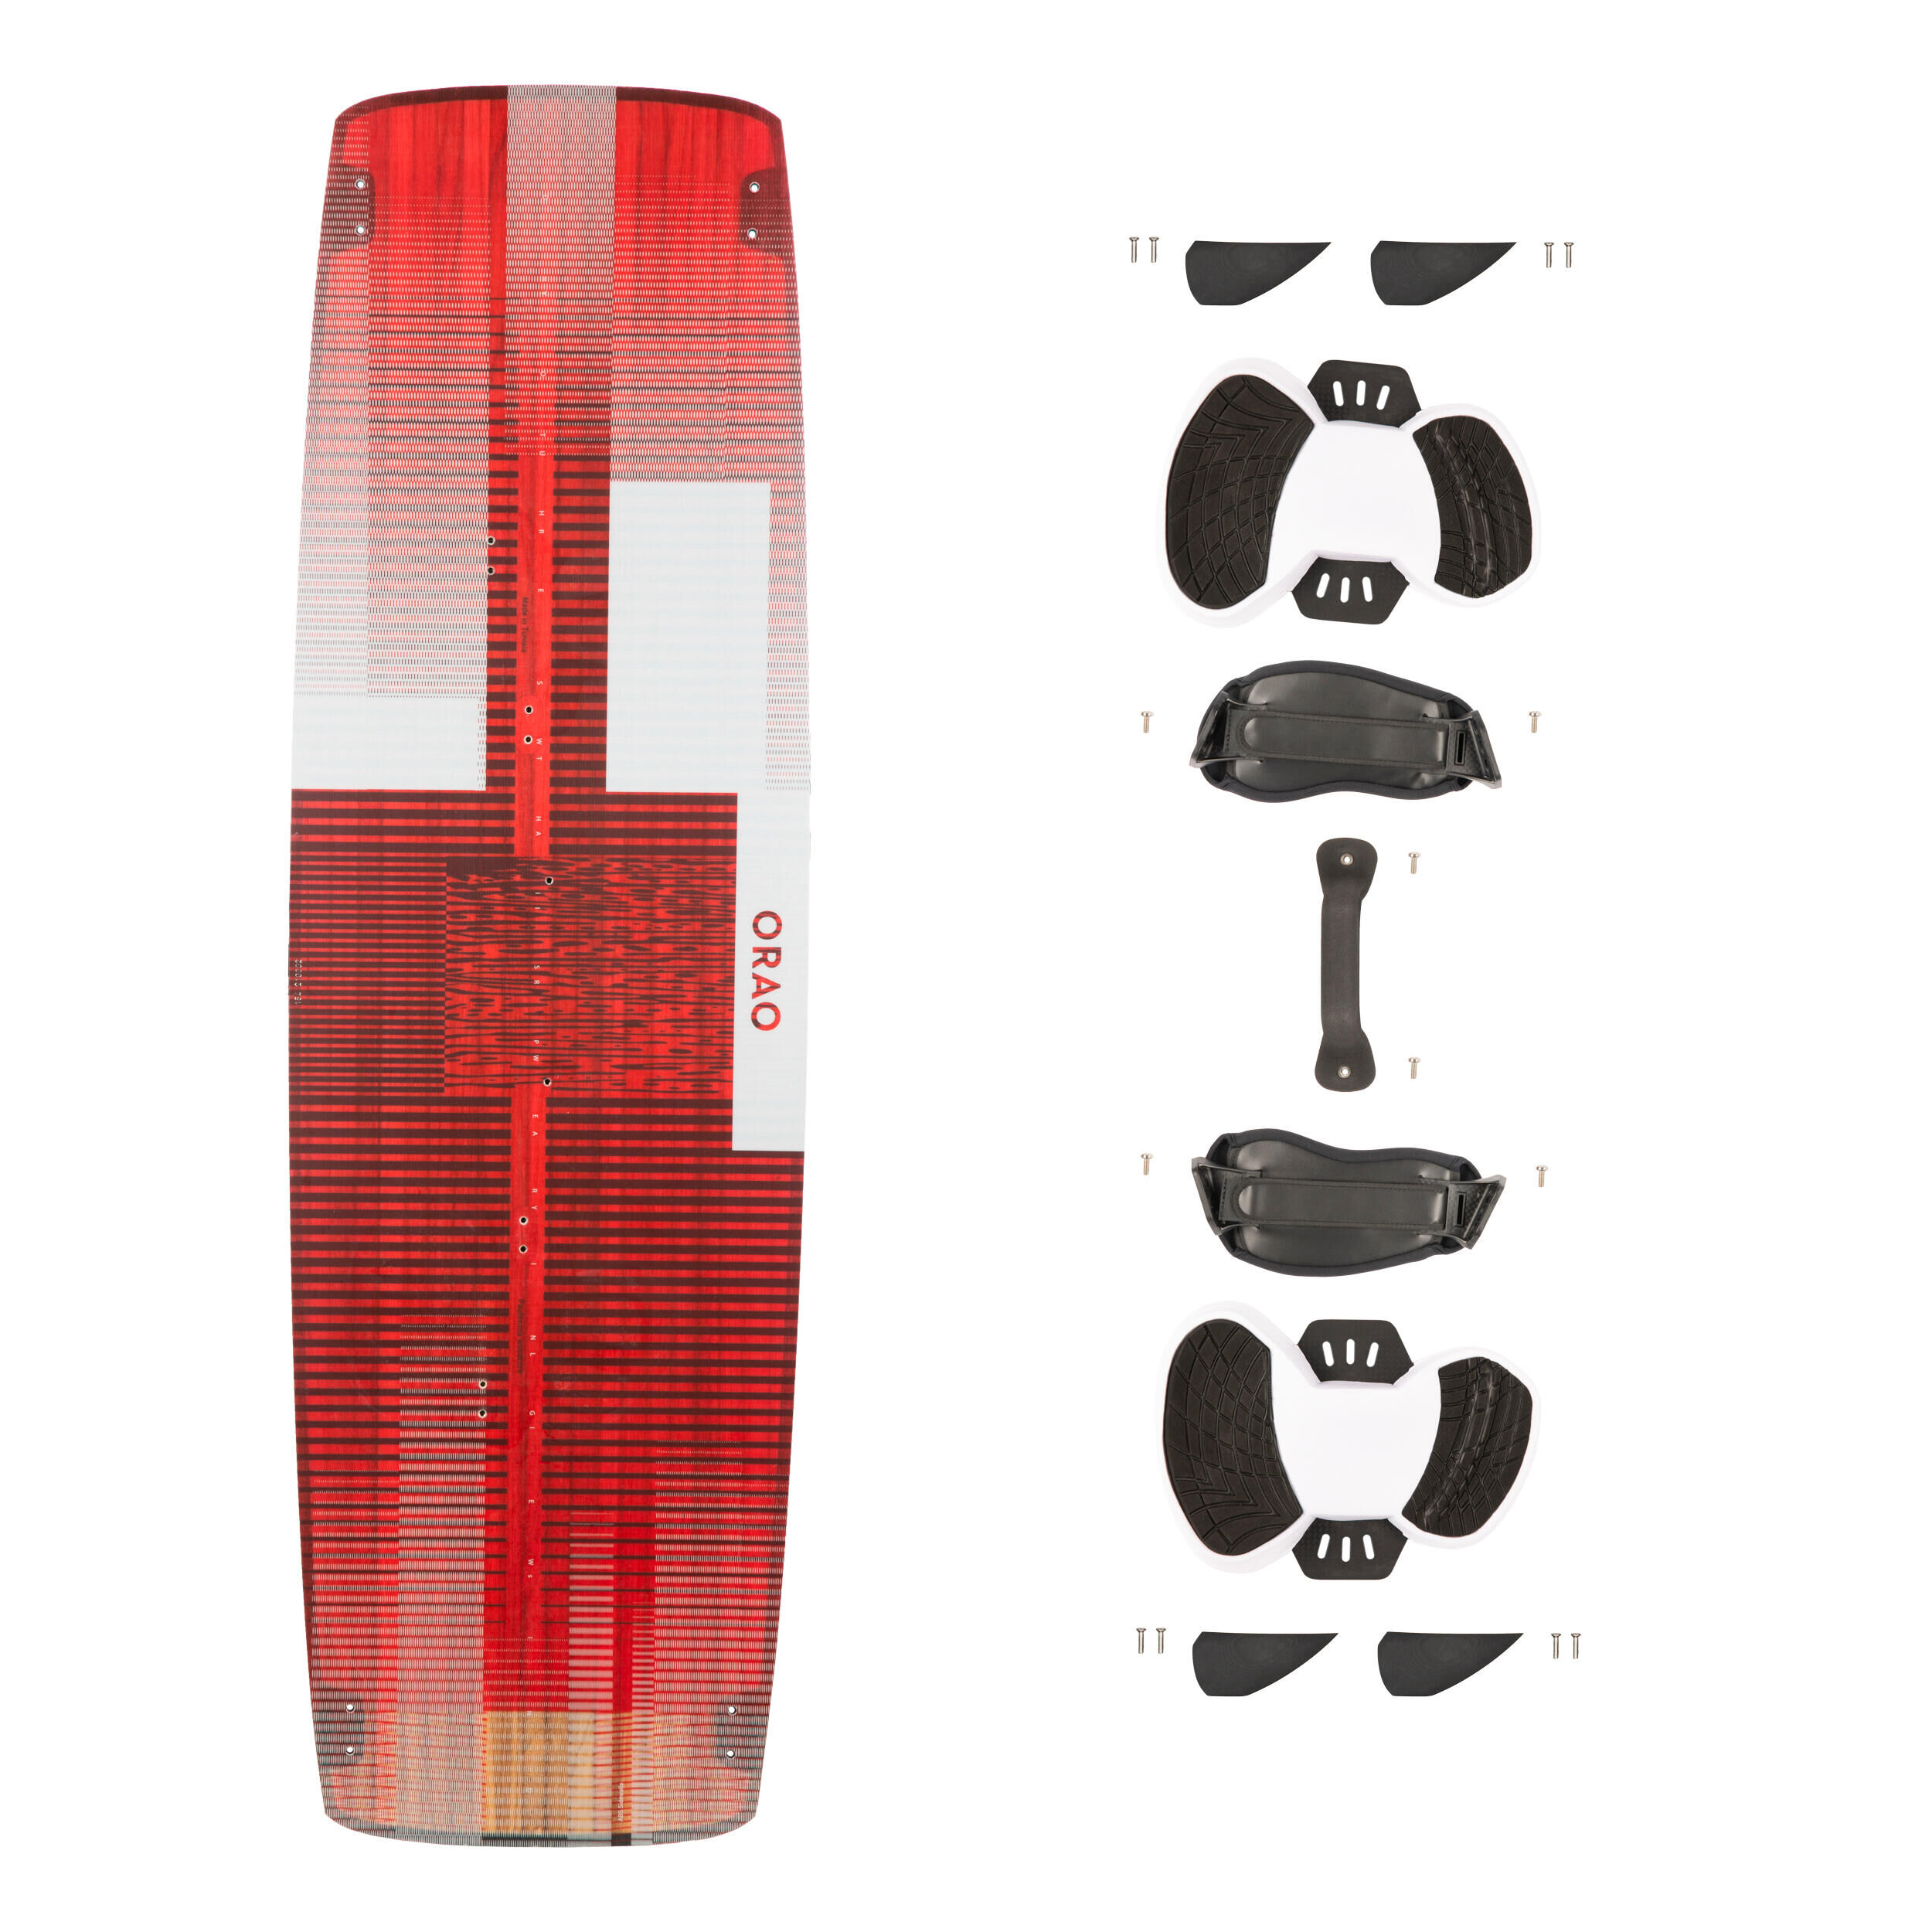 ORAO Twintip carbon kitesurf board 154 x 46 cm (pads and straps included) - TT500